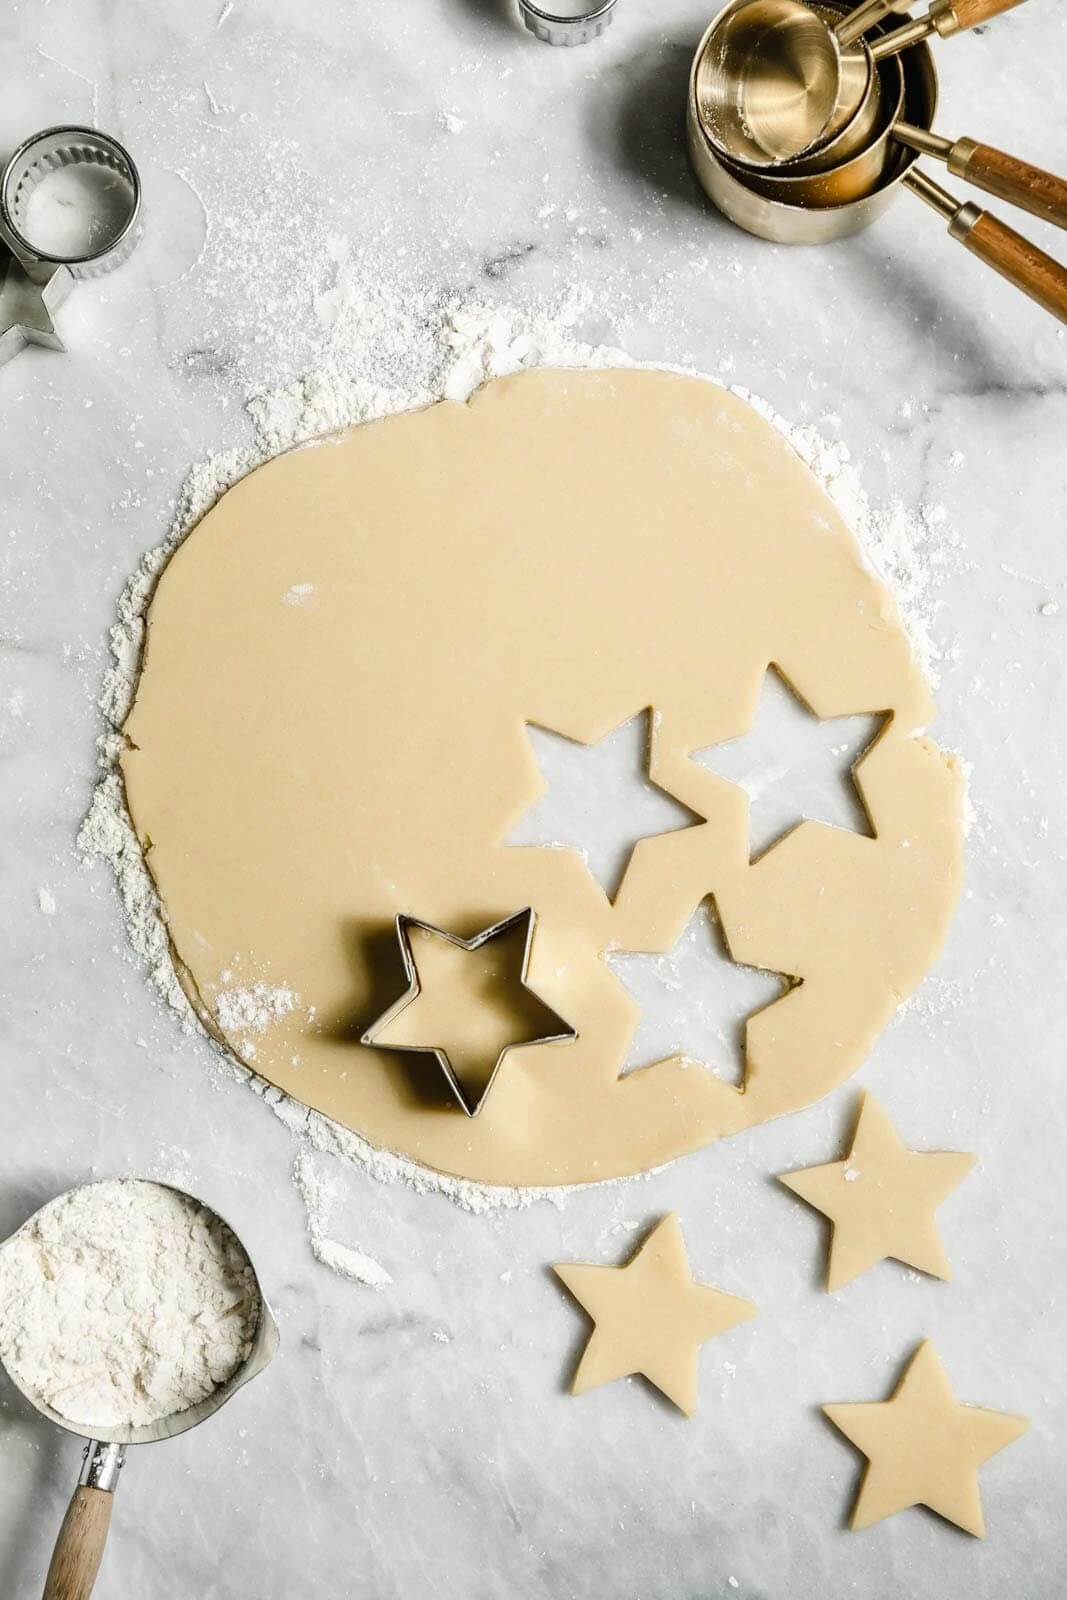 https://bromabakery.com/wp-content/uploads/2019/04/How-To-Make-the-Best-Sugar-Cookies-7-1067x1600.webp